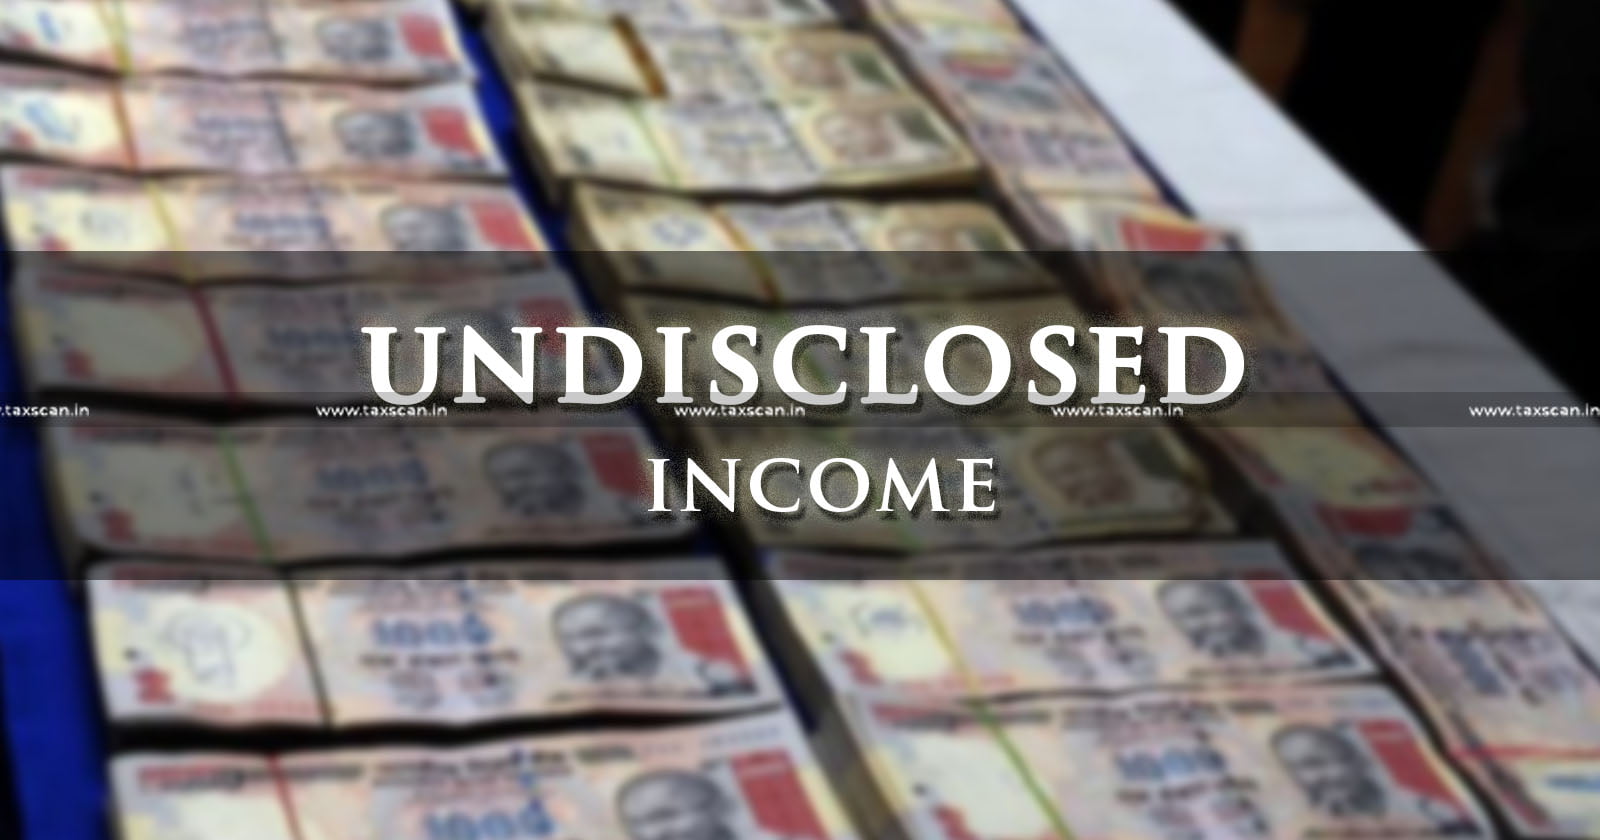 Cash Deposited - Bank Account - result of Earlier Withdrawal - Undisclosed Income-ITAT-TAXSCAN